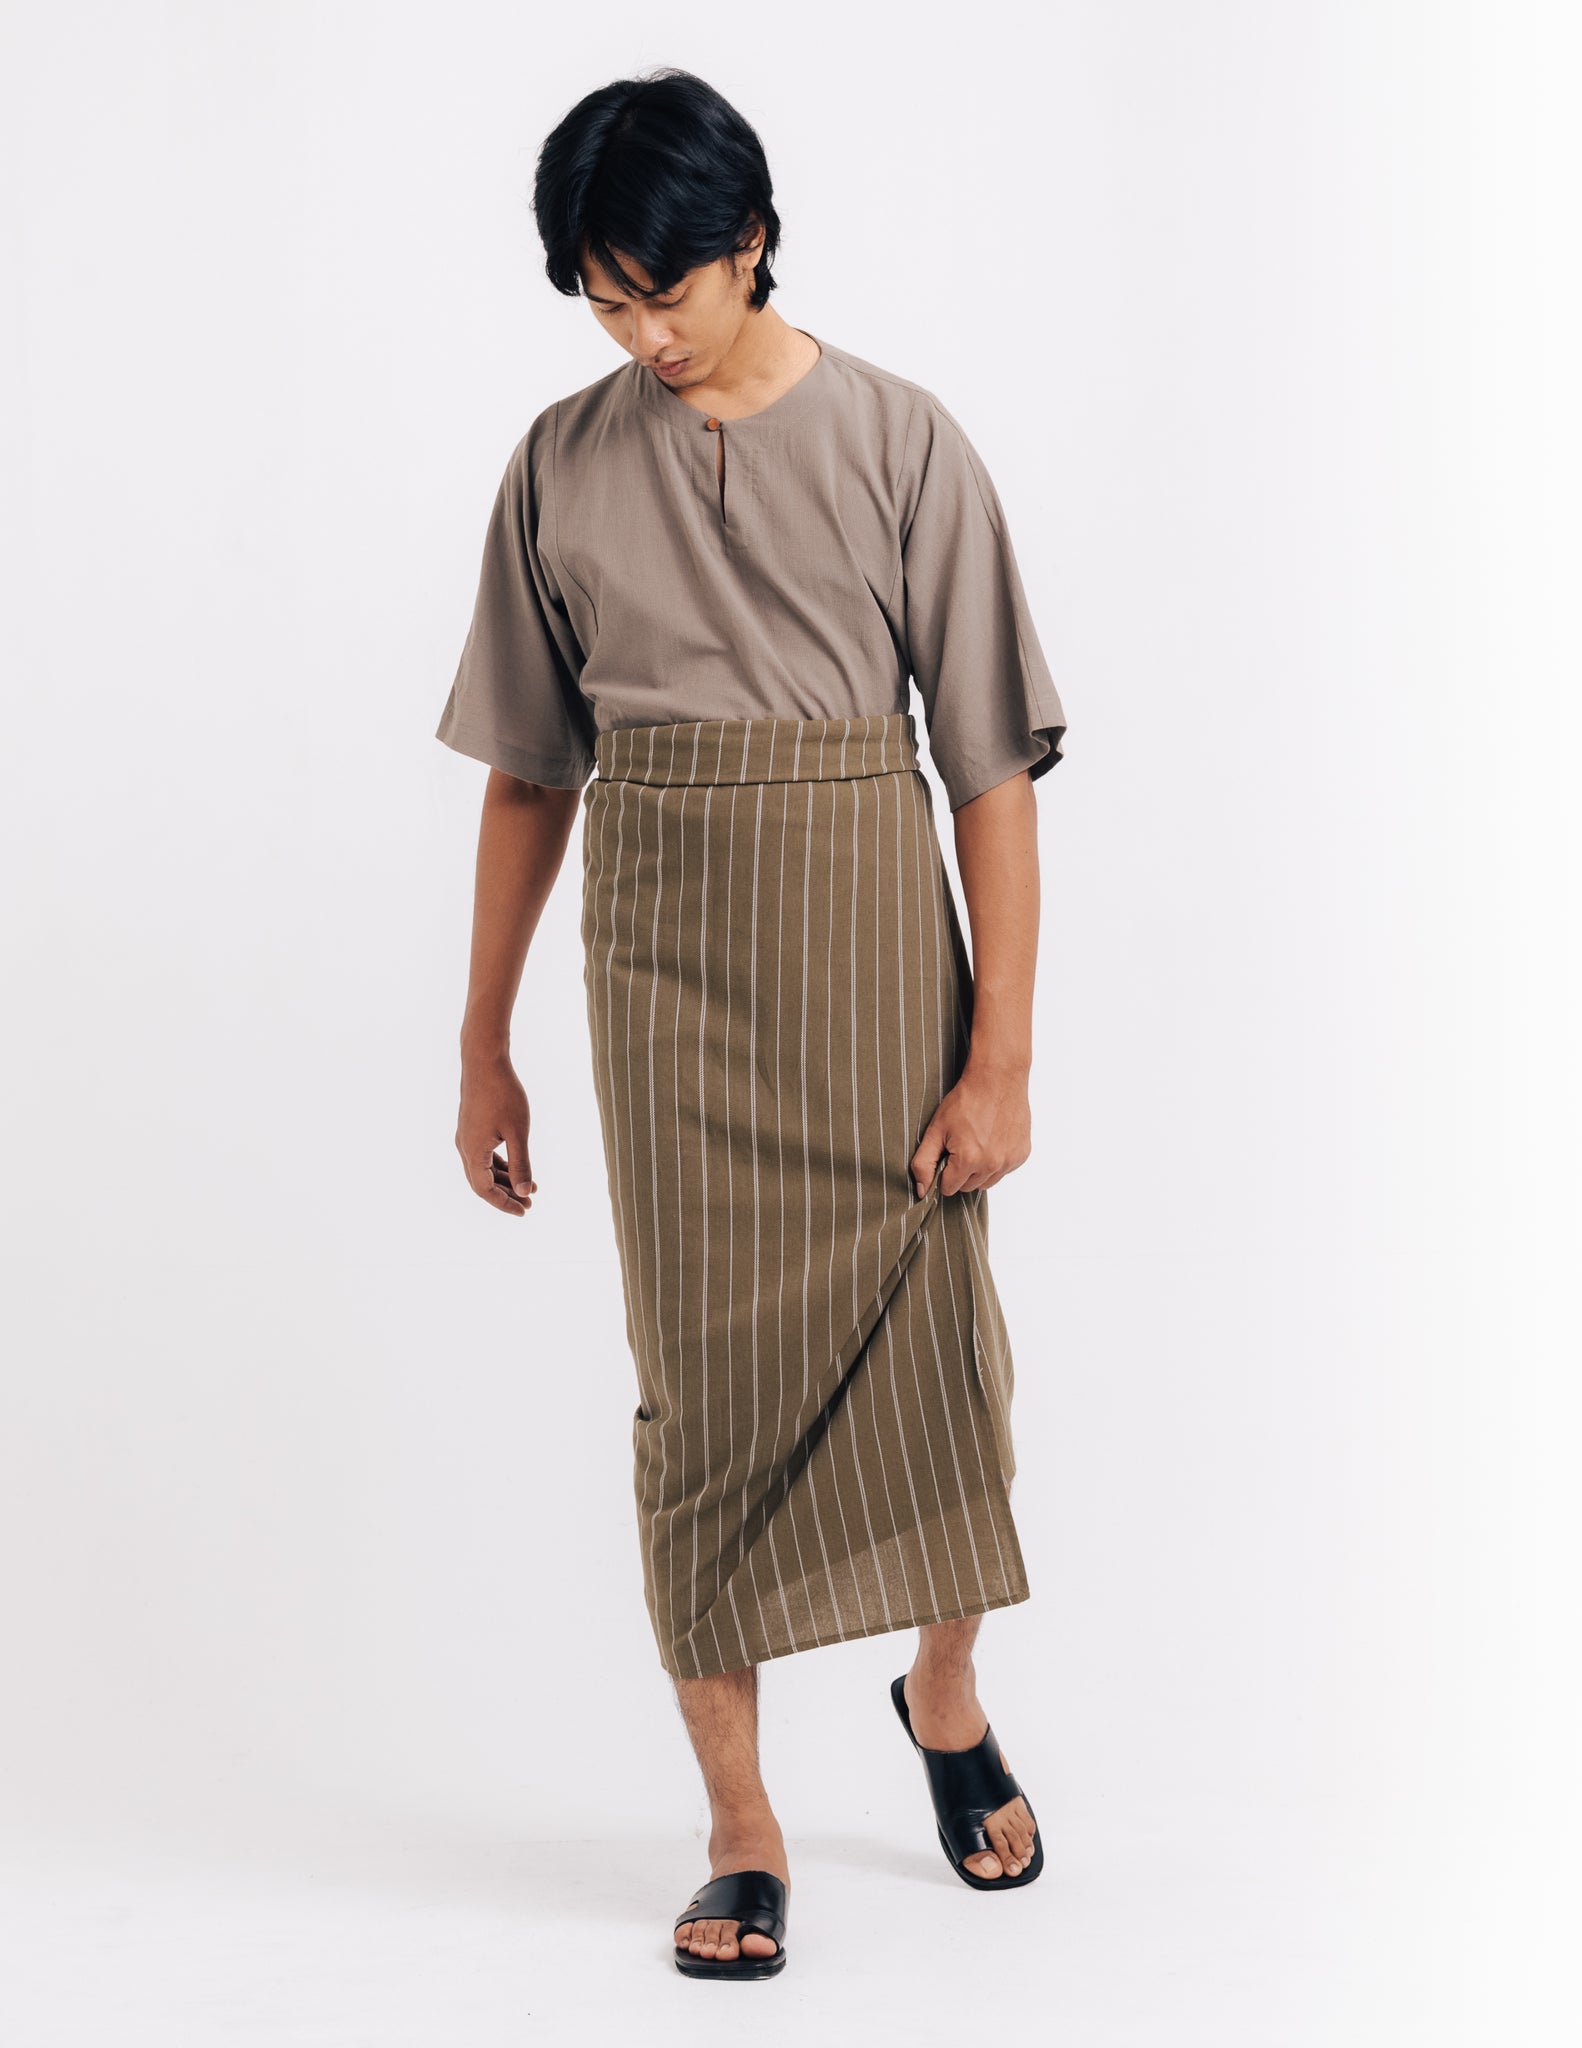 Unisex: Bumi Wrapped Samping/Sarung (Striped Olive)